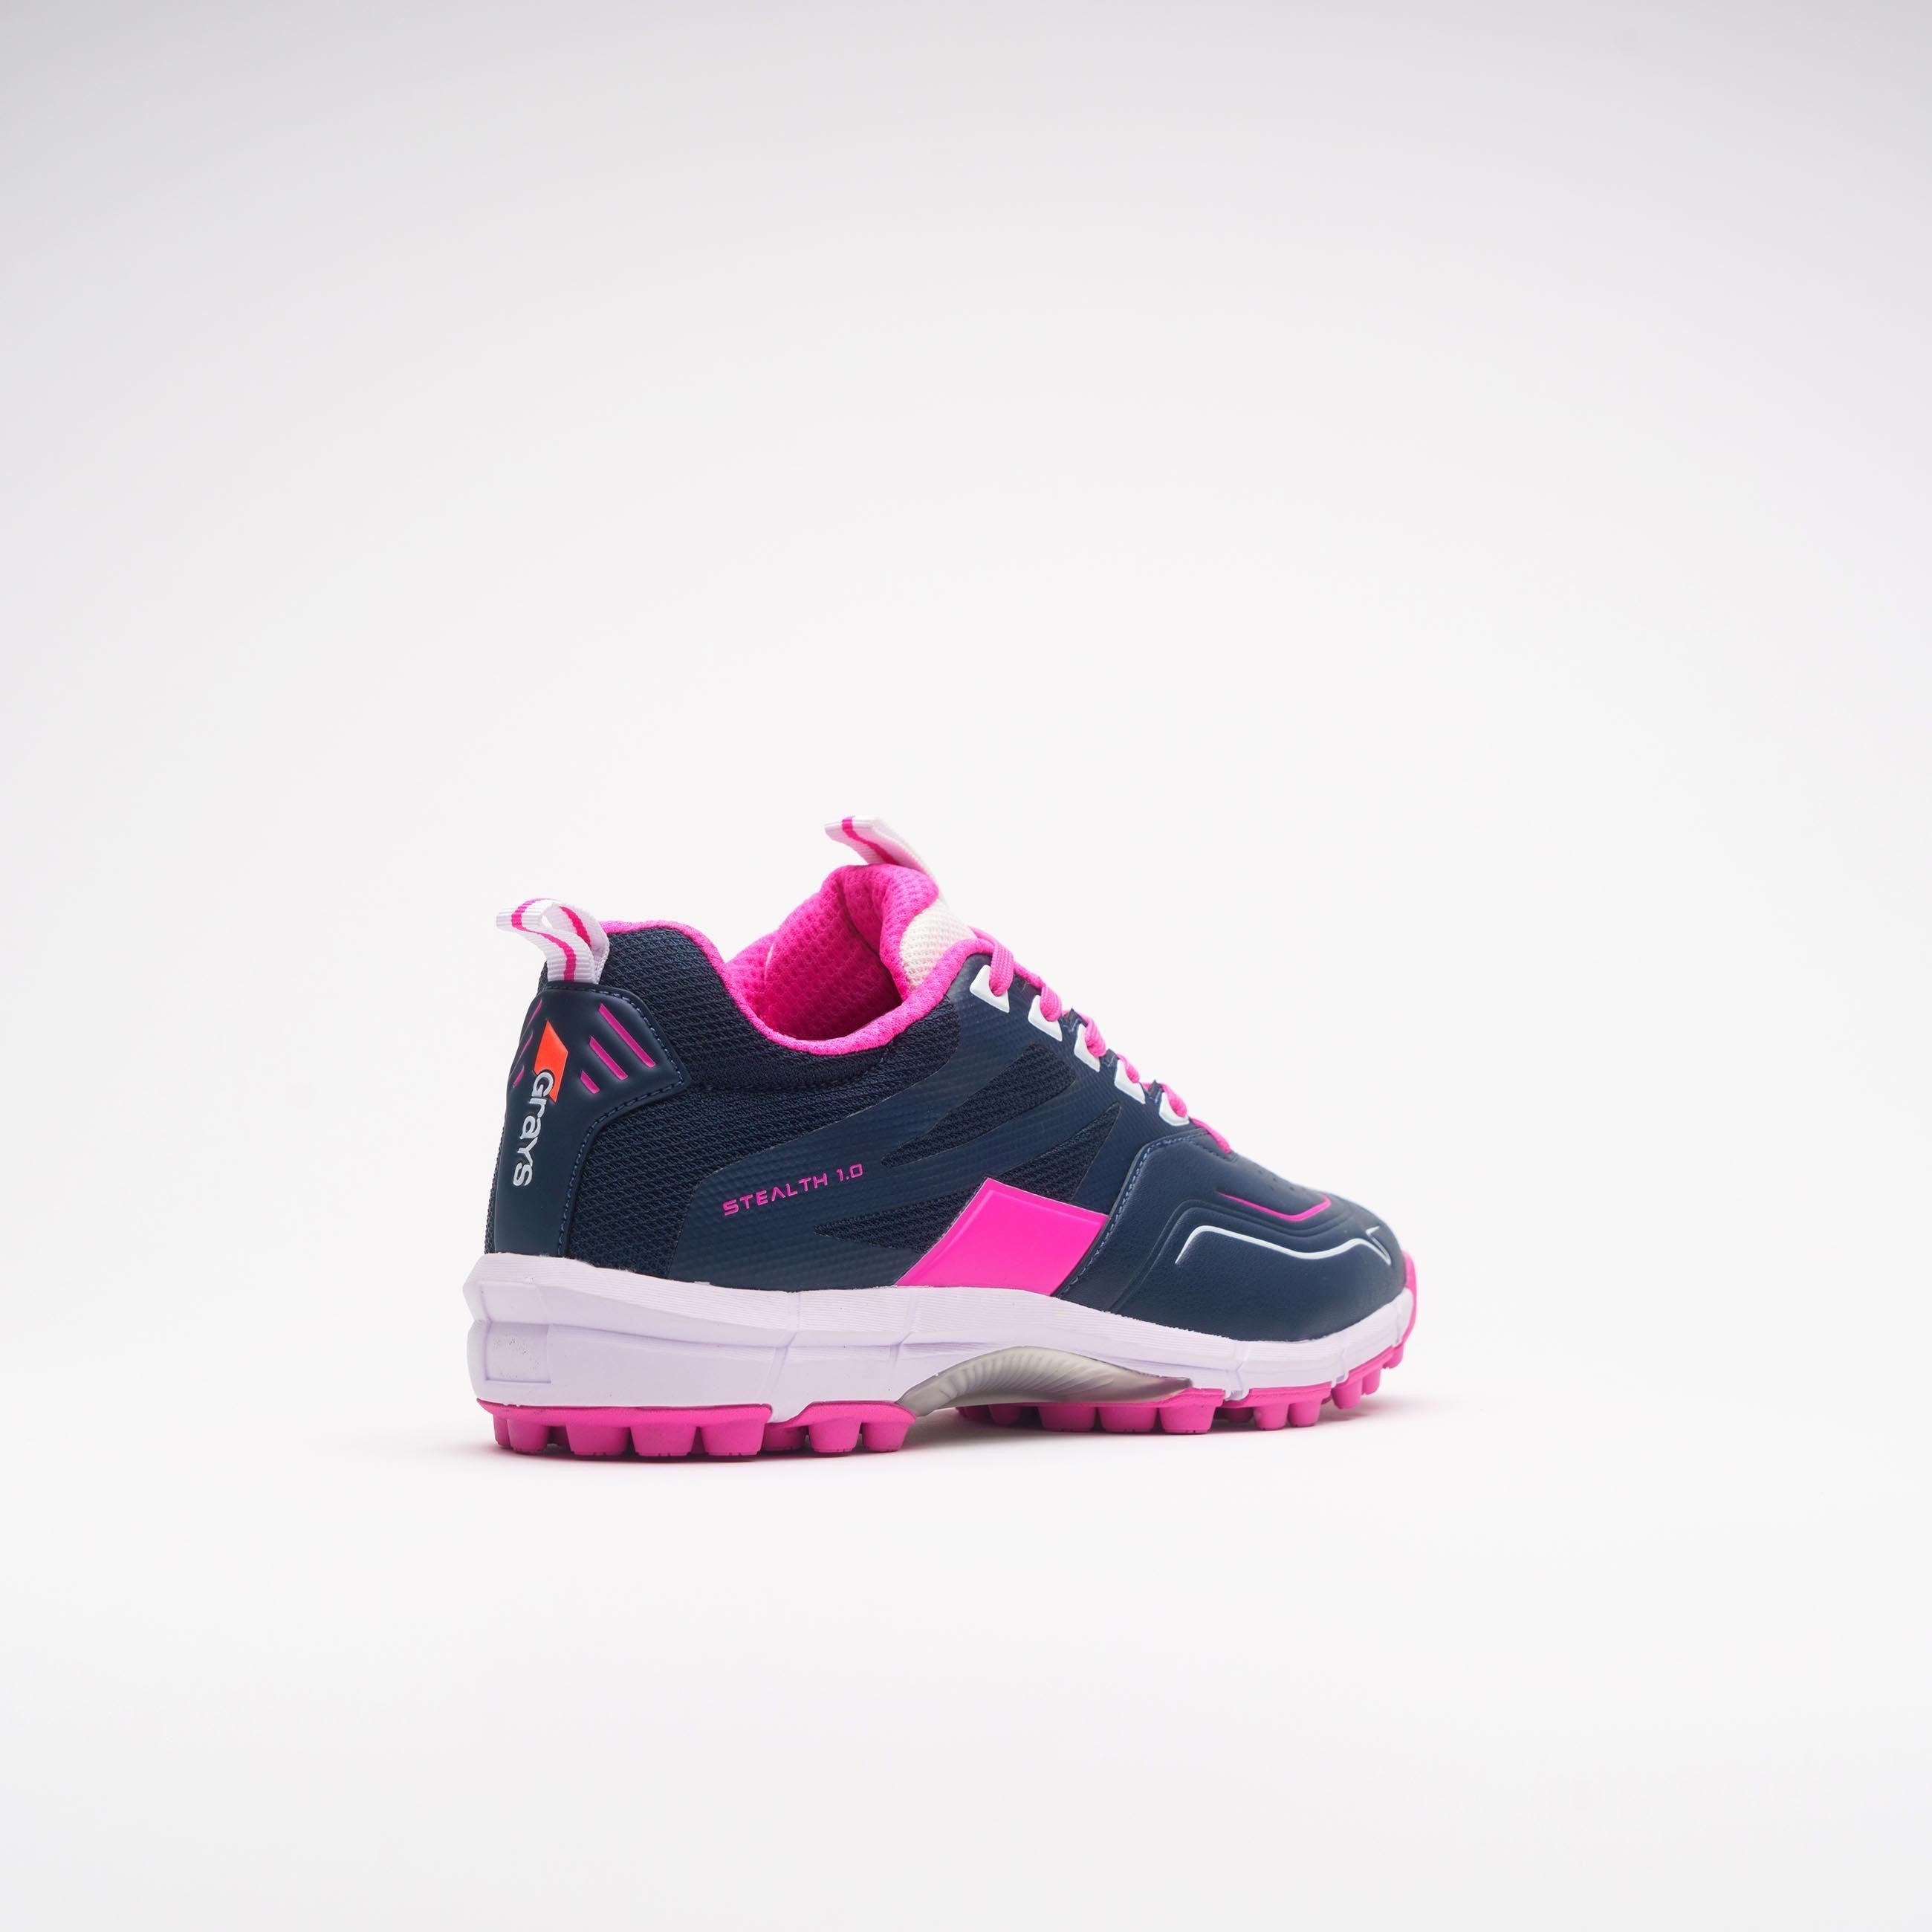 HSEG24Shoes Stealth 1.0 Navy Pink, Outstep Heel